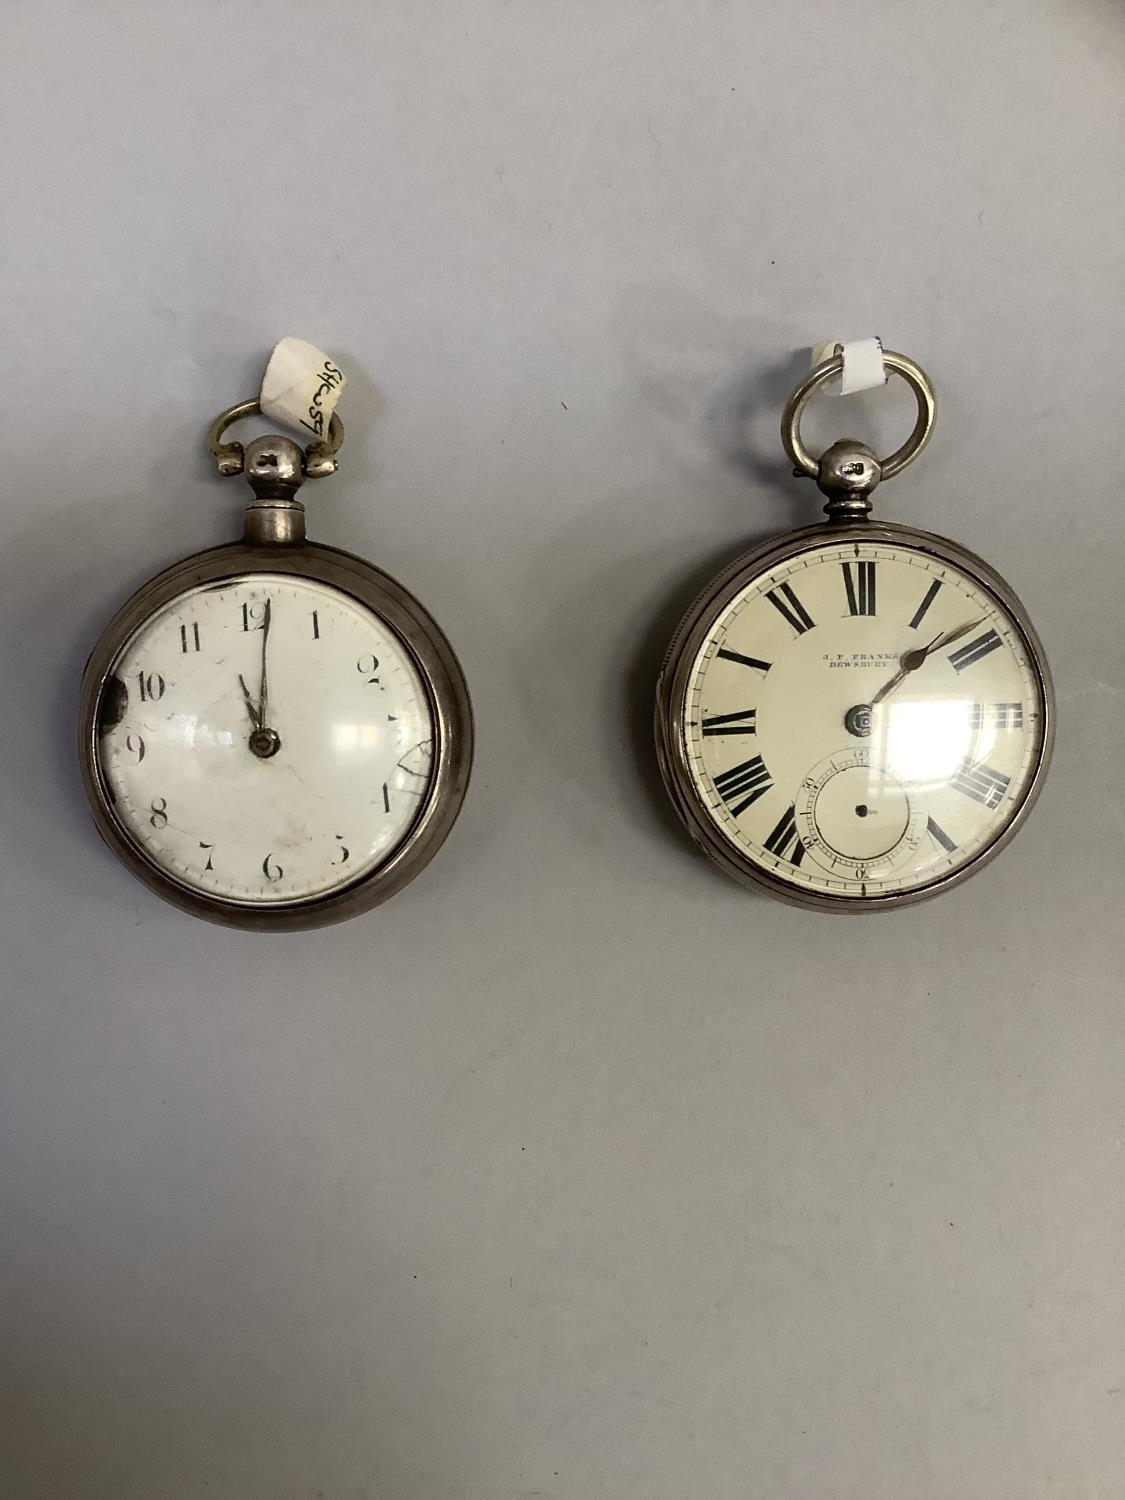 A George IV pocket watch by Bartholomew Levington of London, case c.1810, with right angle verge